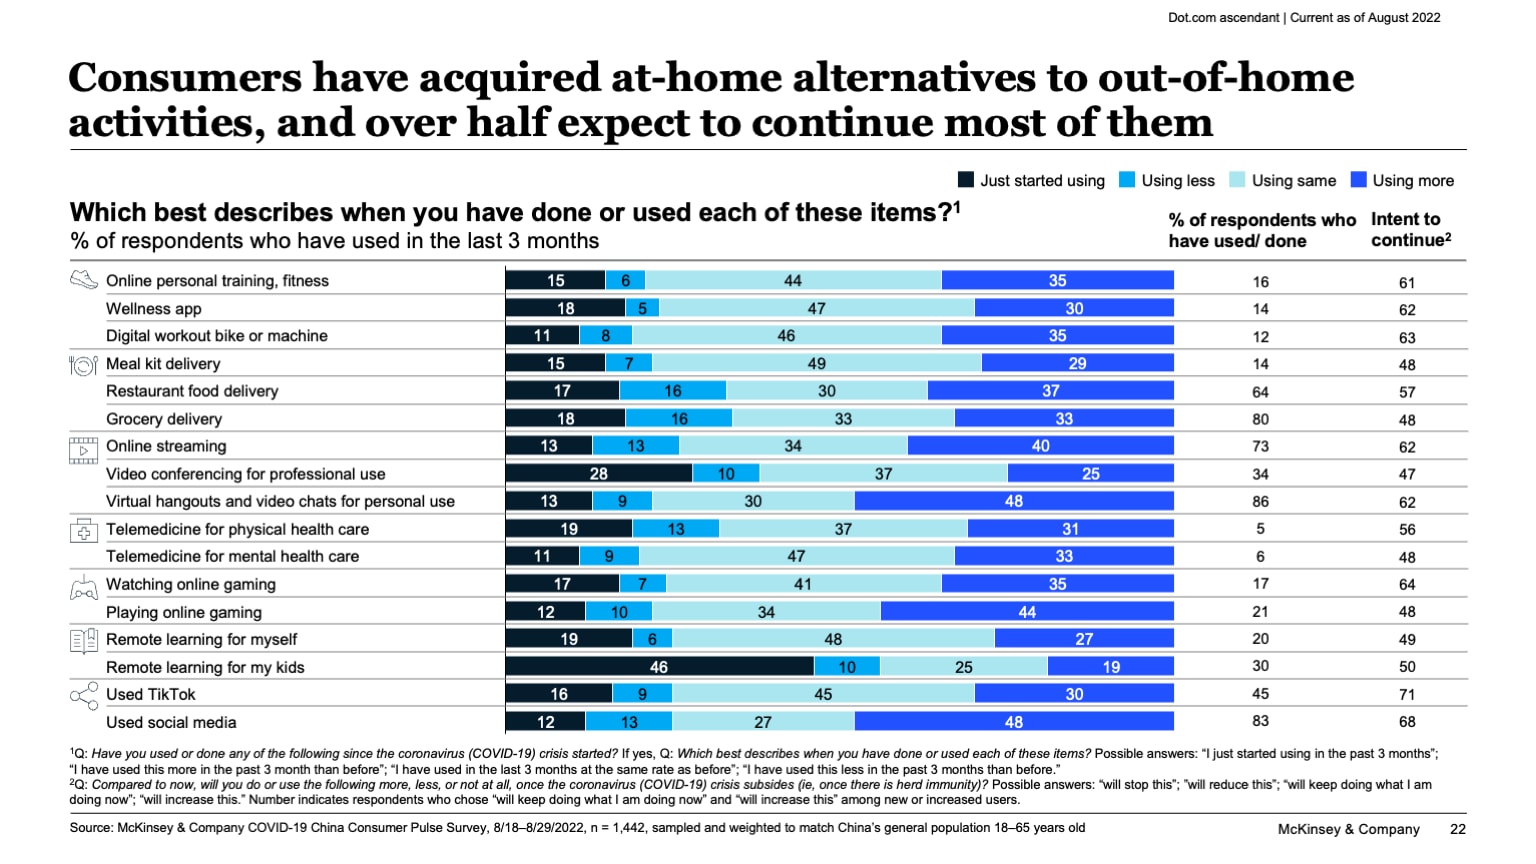 Consumers have acquired at-home alternatives to out-of-home activities, and over half expect to continue most of them